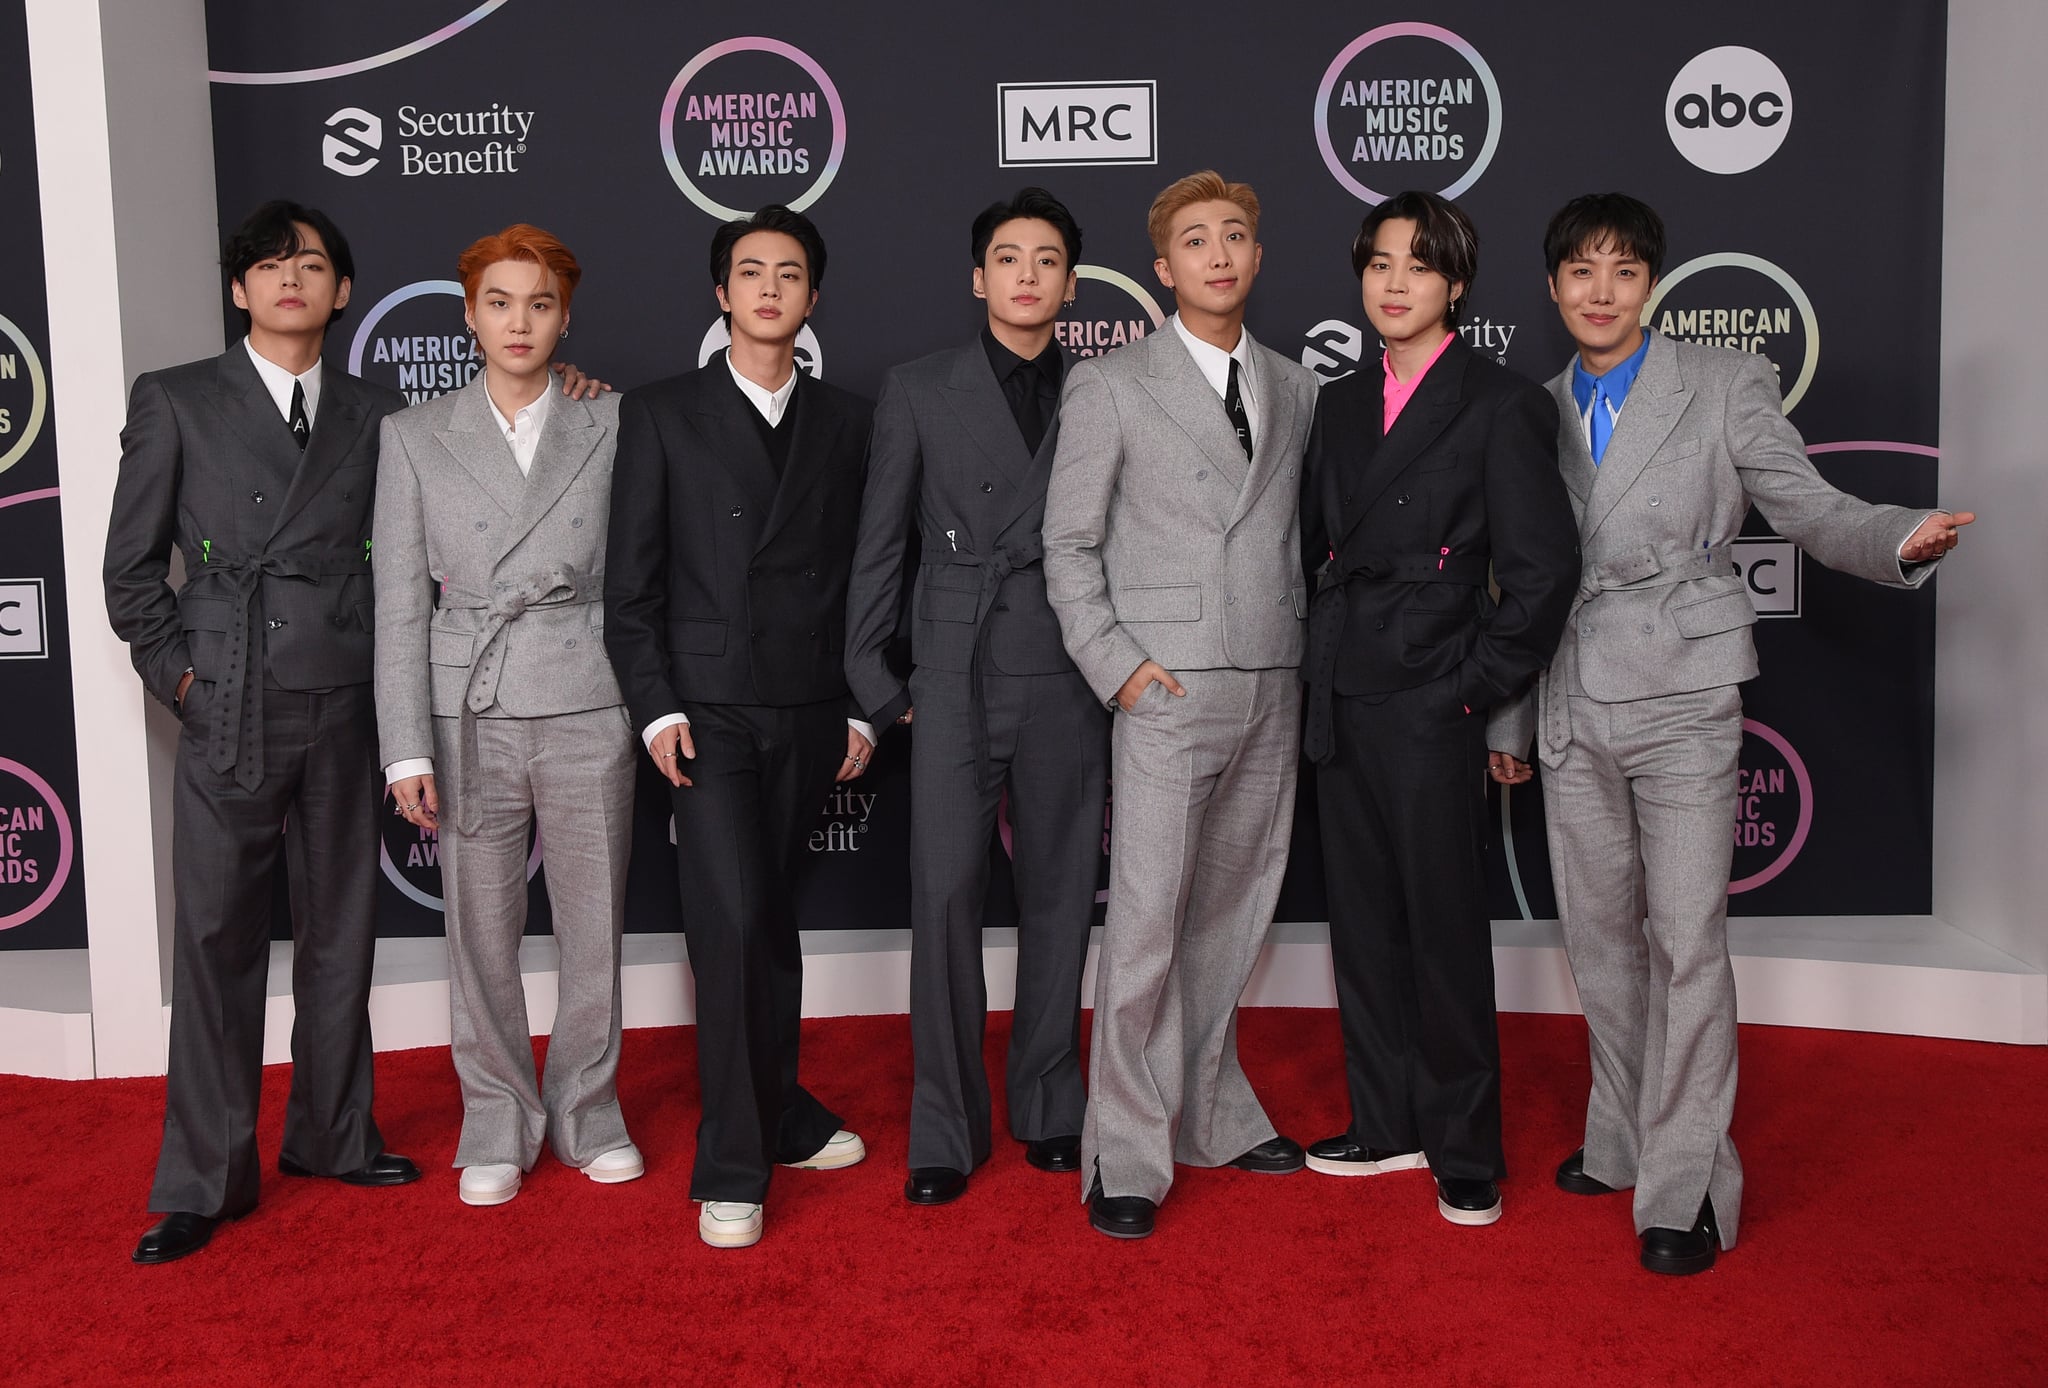 2021 AMERICAN MUSIC AWARDS - The AMAs will air live from the Microsoft Theatre in Los Angeles on Sunday, Nov. 21, at 8:00 p.m. EST/PST on ABC. (ABC via Getty Images)BTS